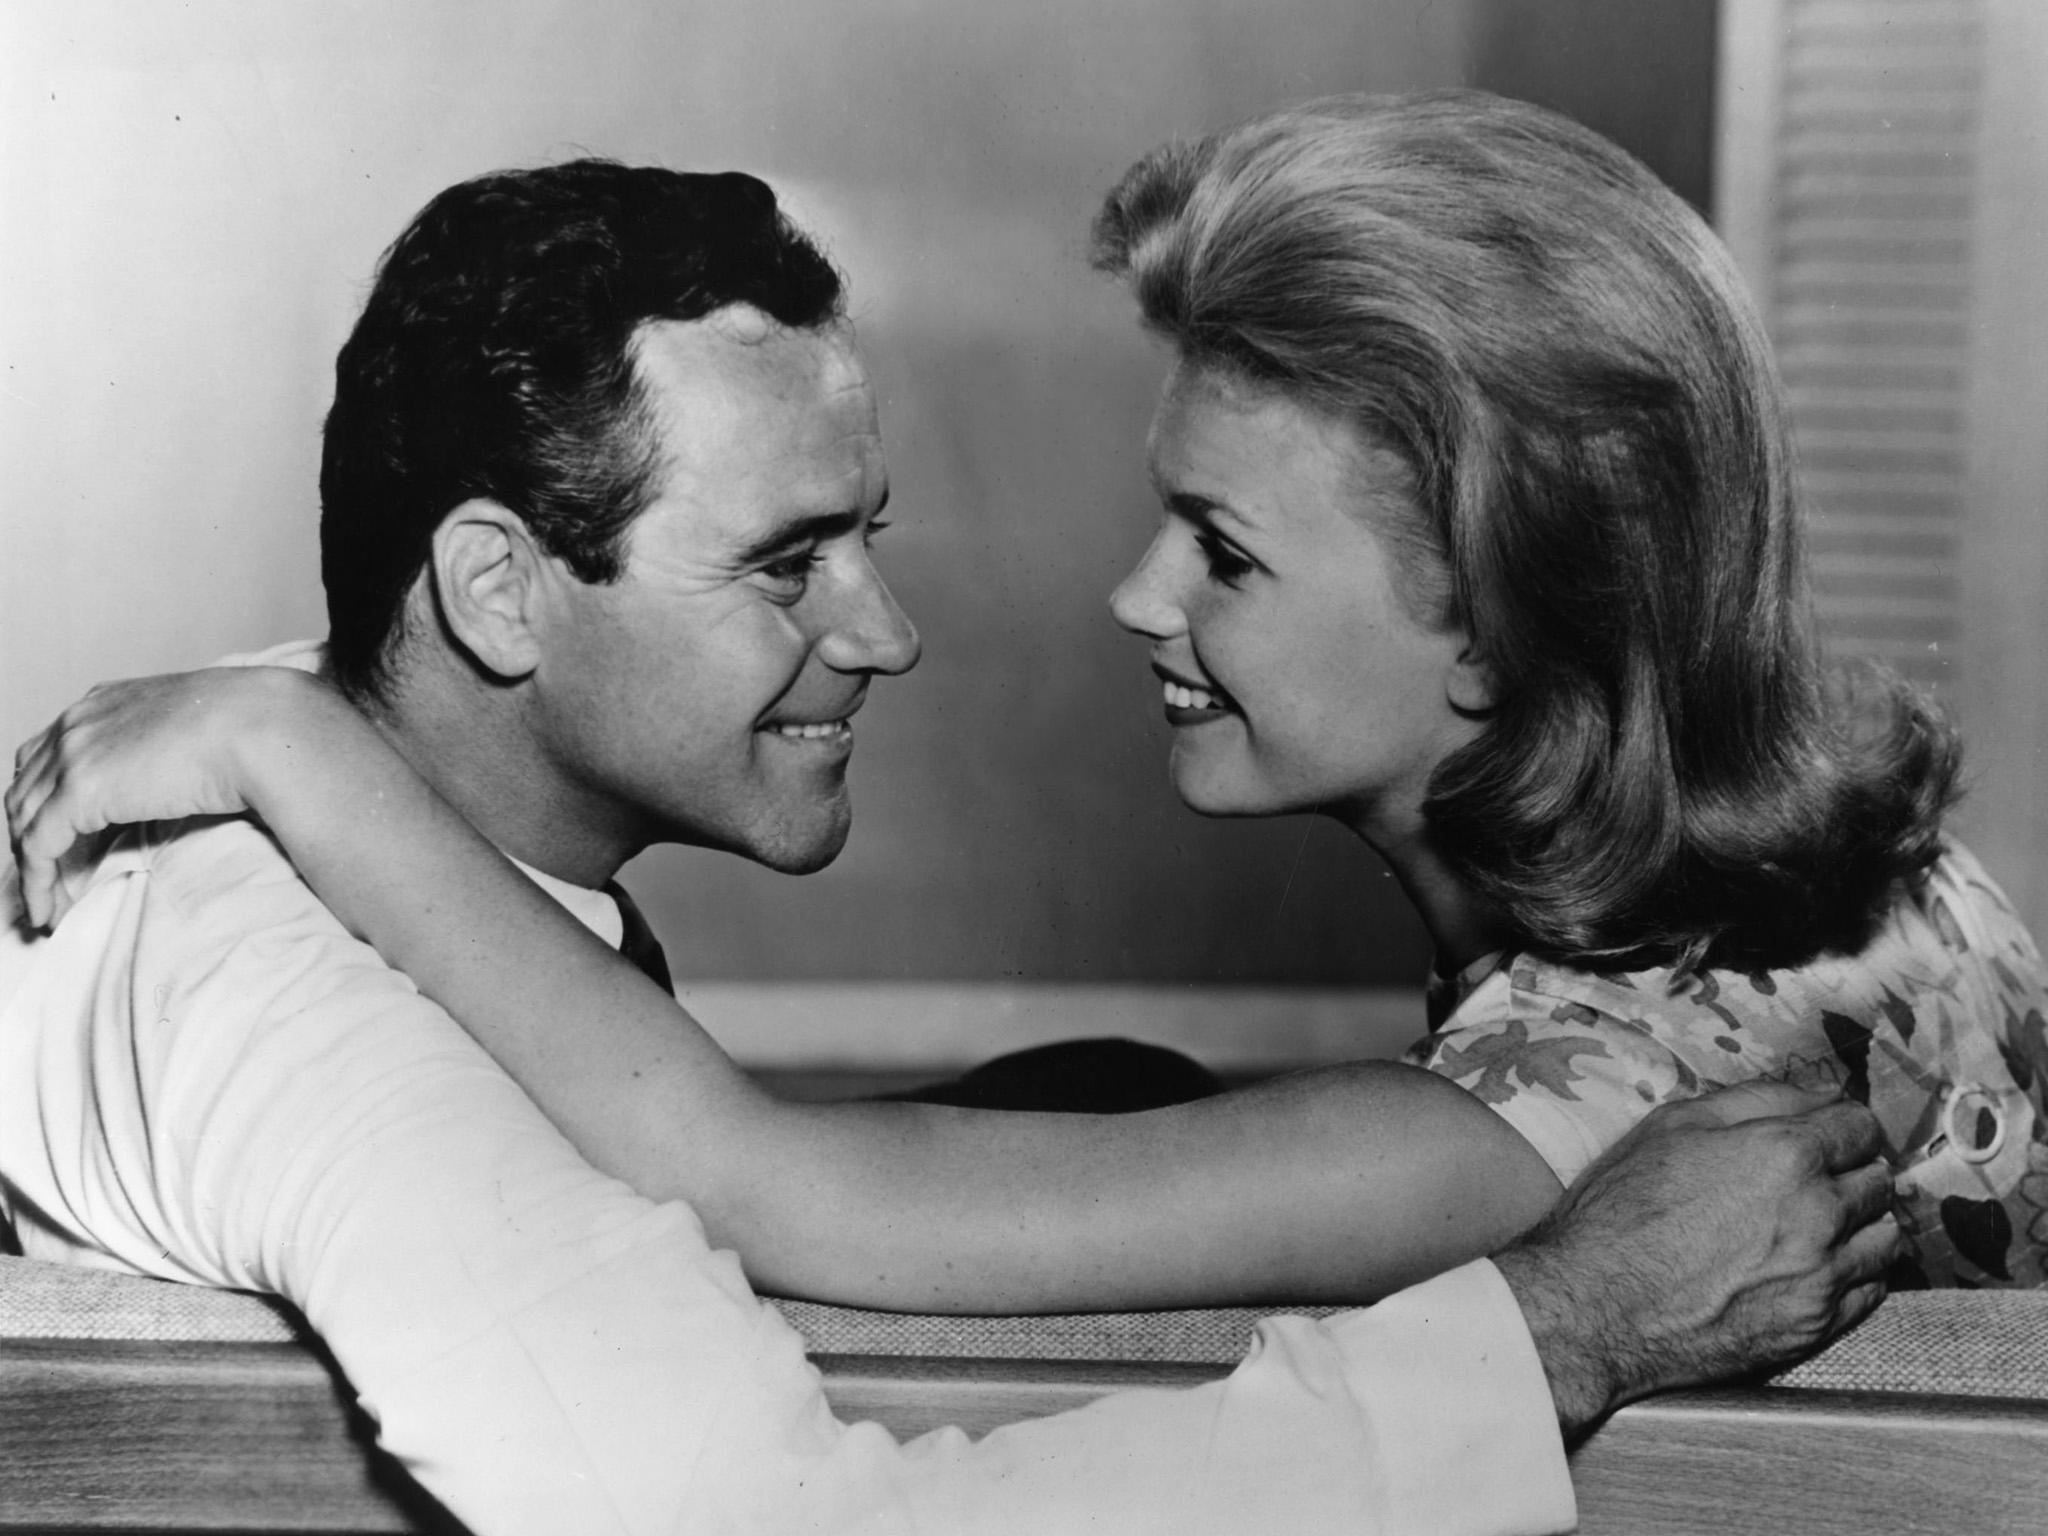 The First Couple: Jack Lemmon & Judy Holliday in It Should Happen to You